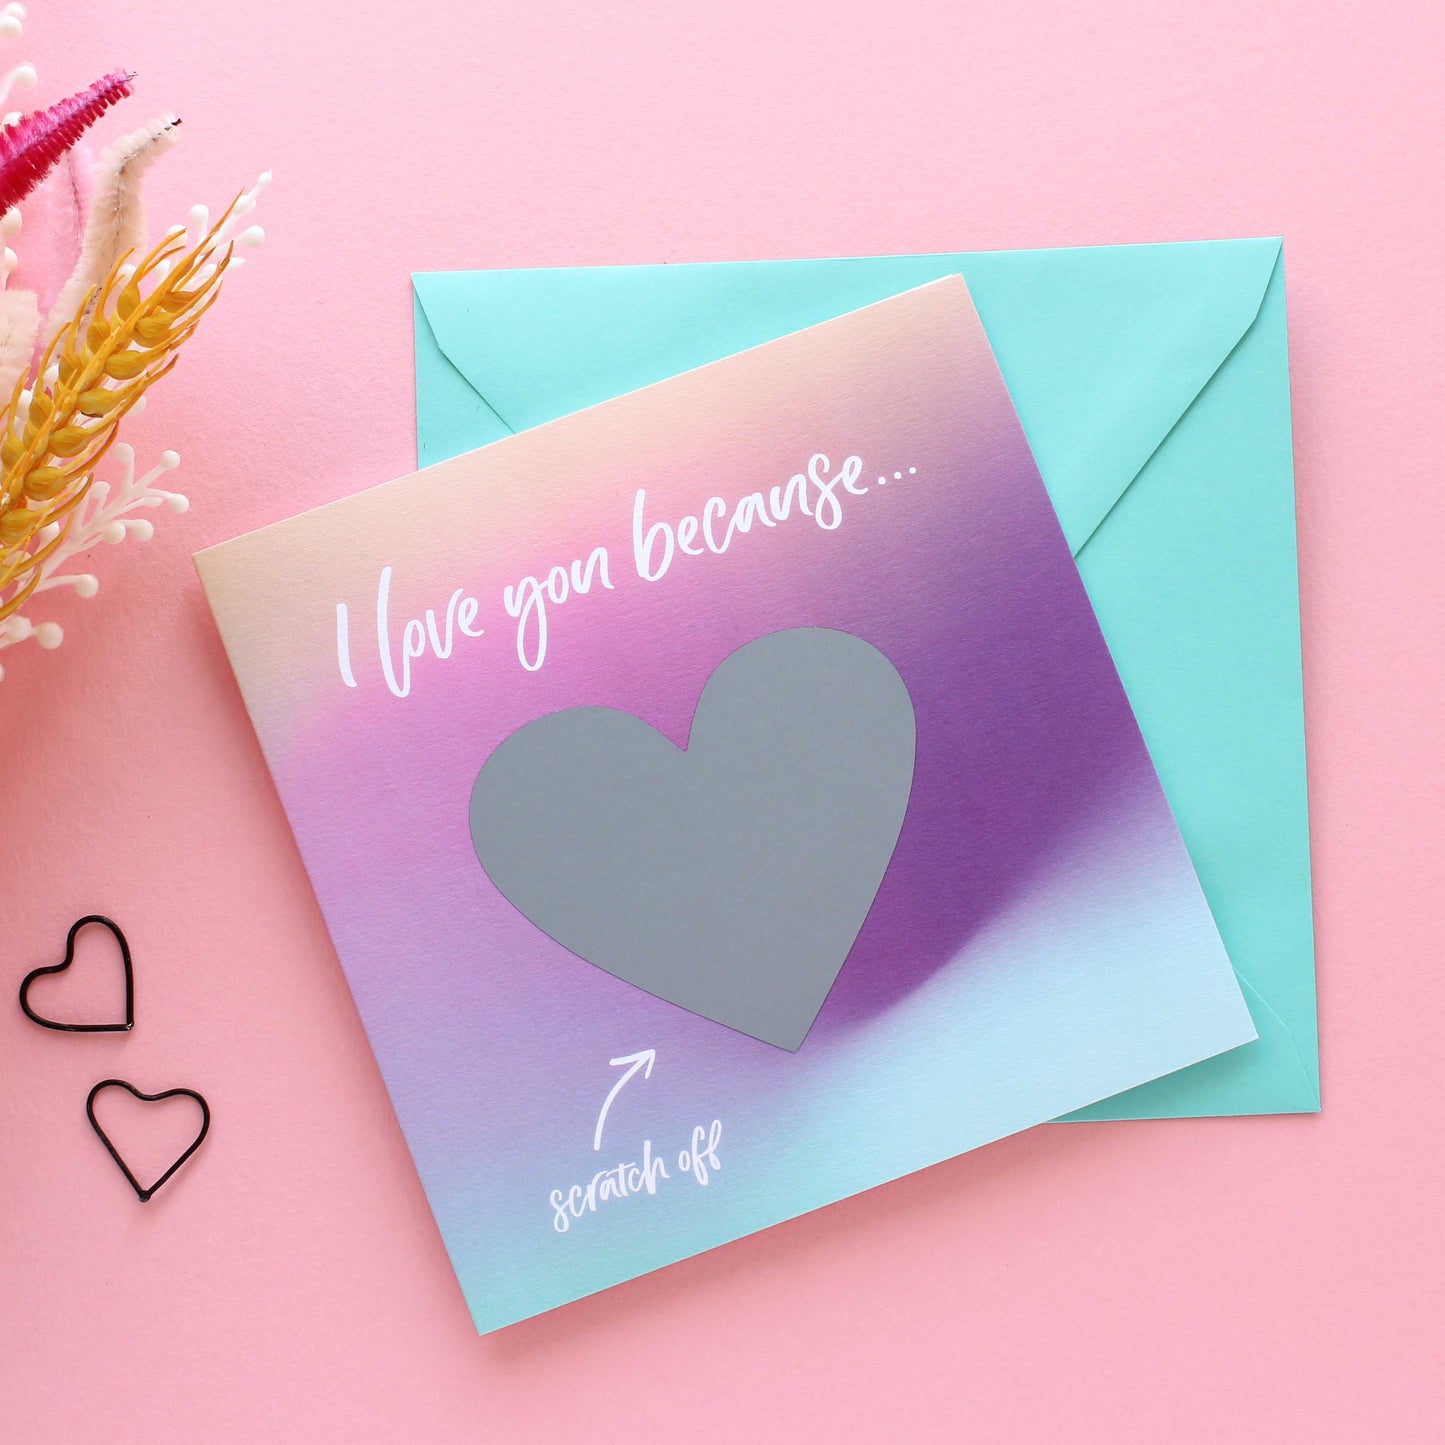 Love you because scratch off Valentines card with turquoise envelope.